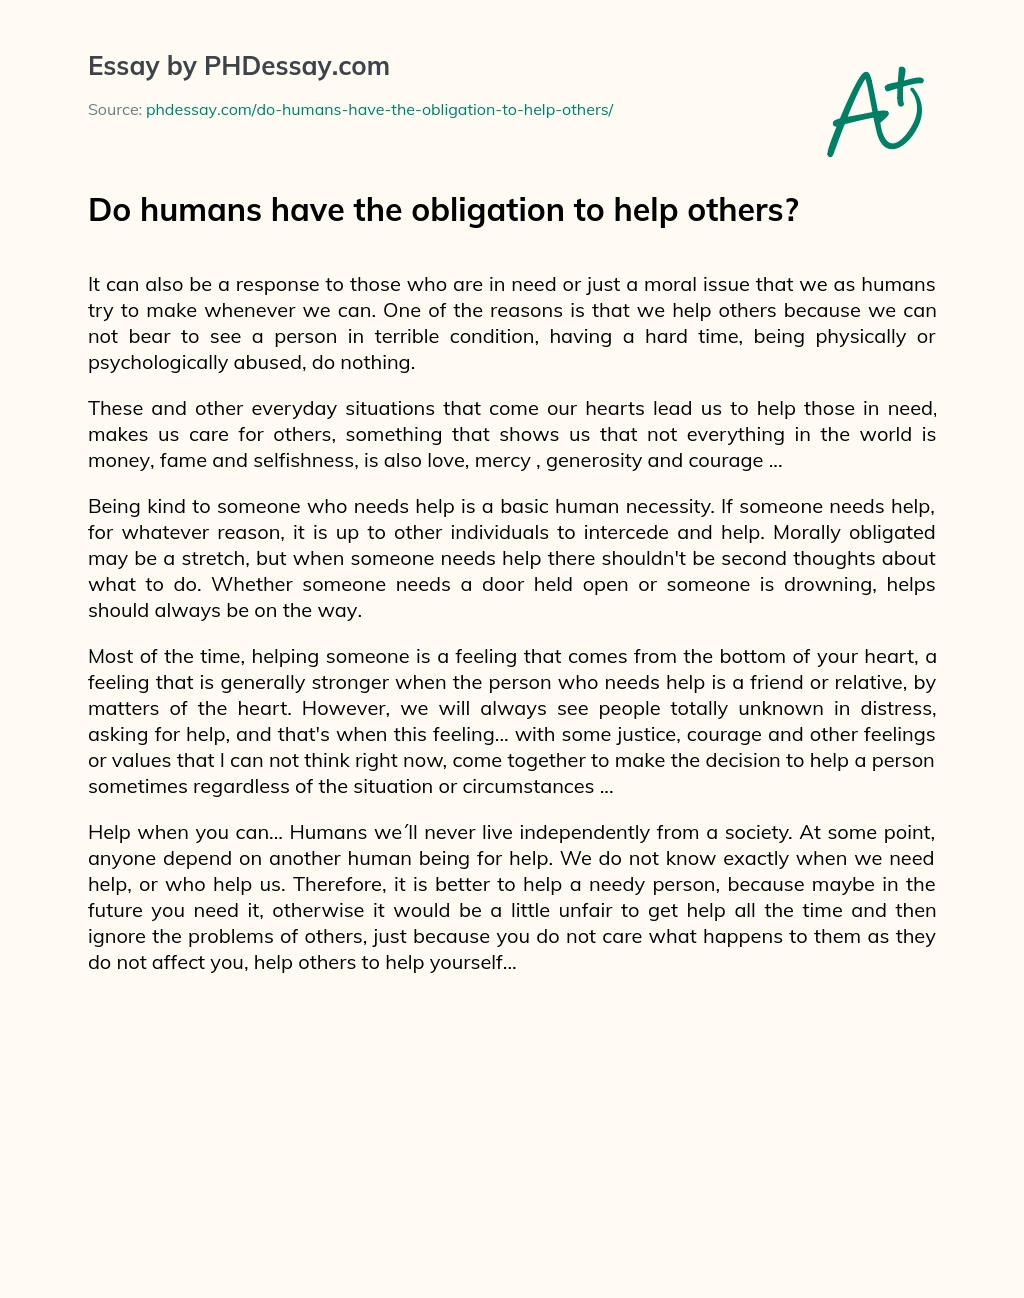 Do humans have the obligation to help others? essay